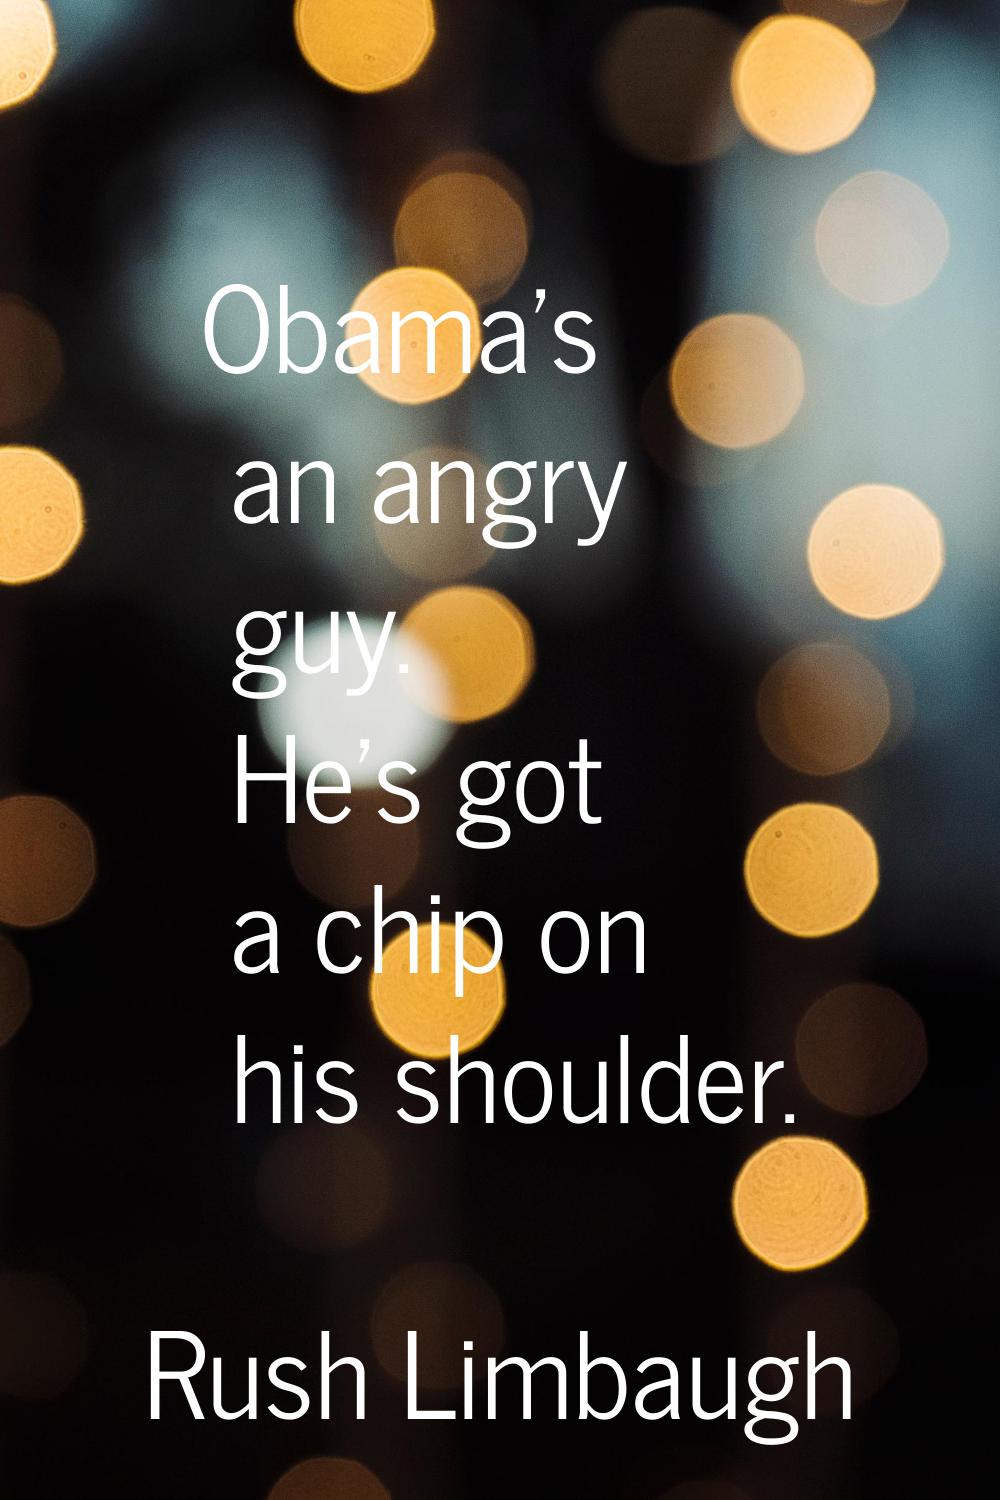 Obama's an angry guy. He's got a chip on his shoulder.